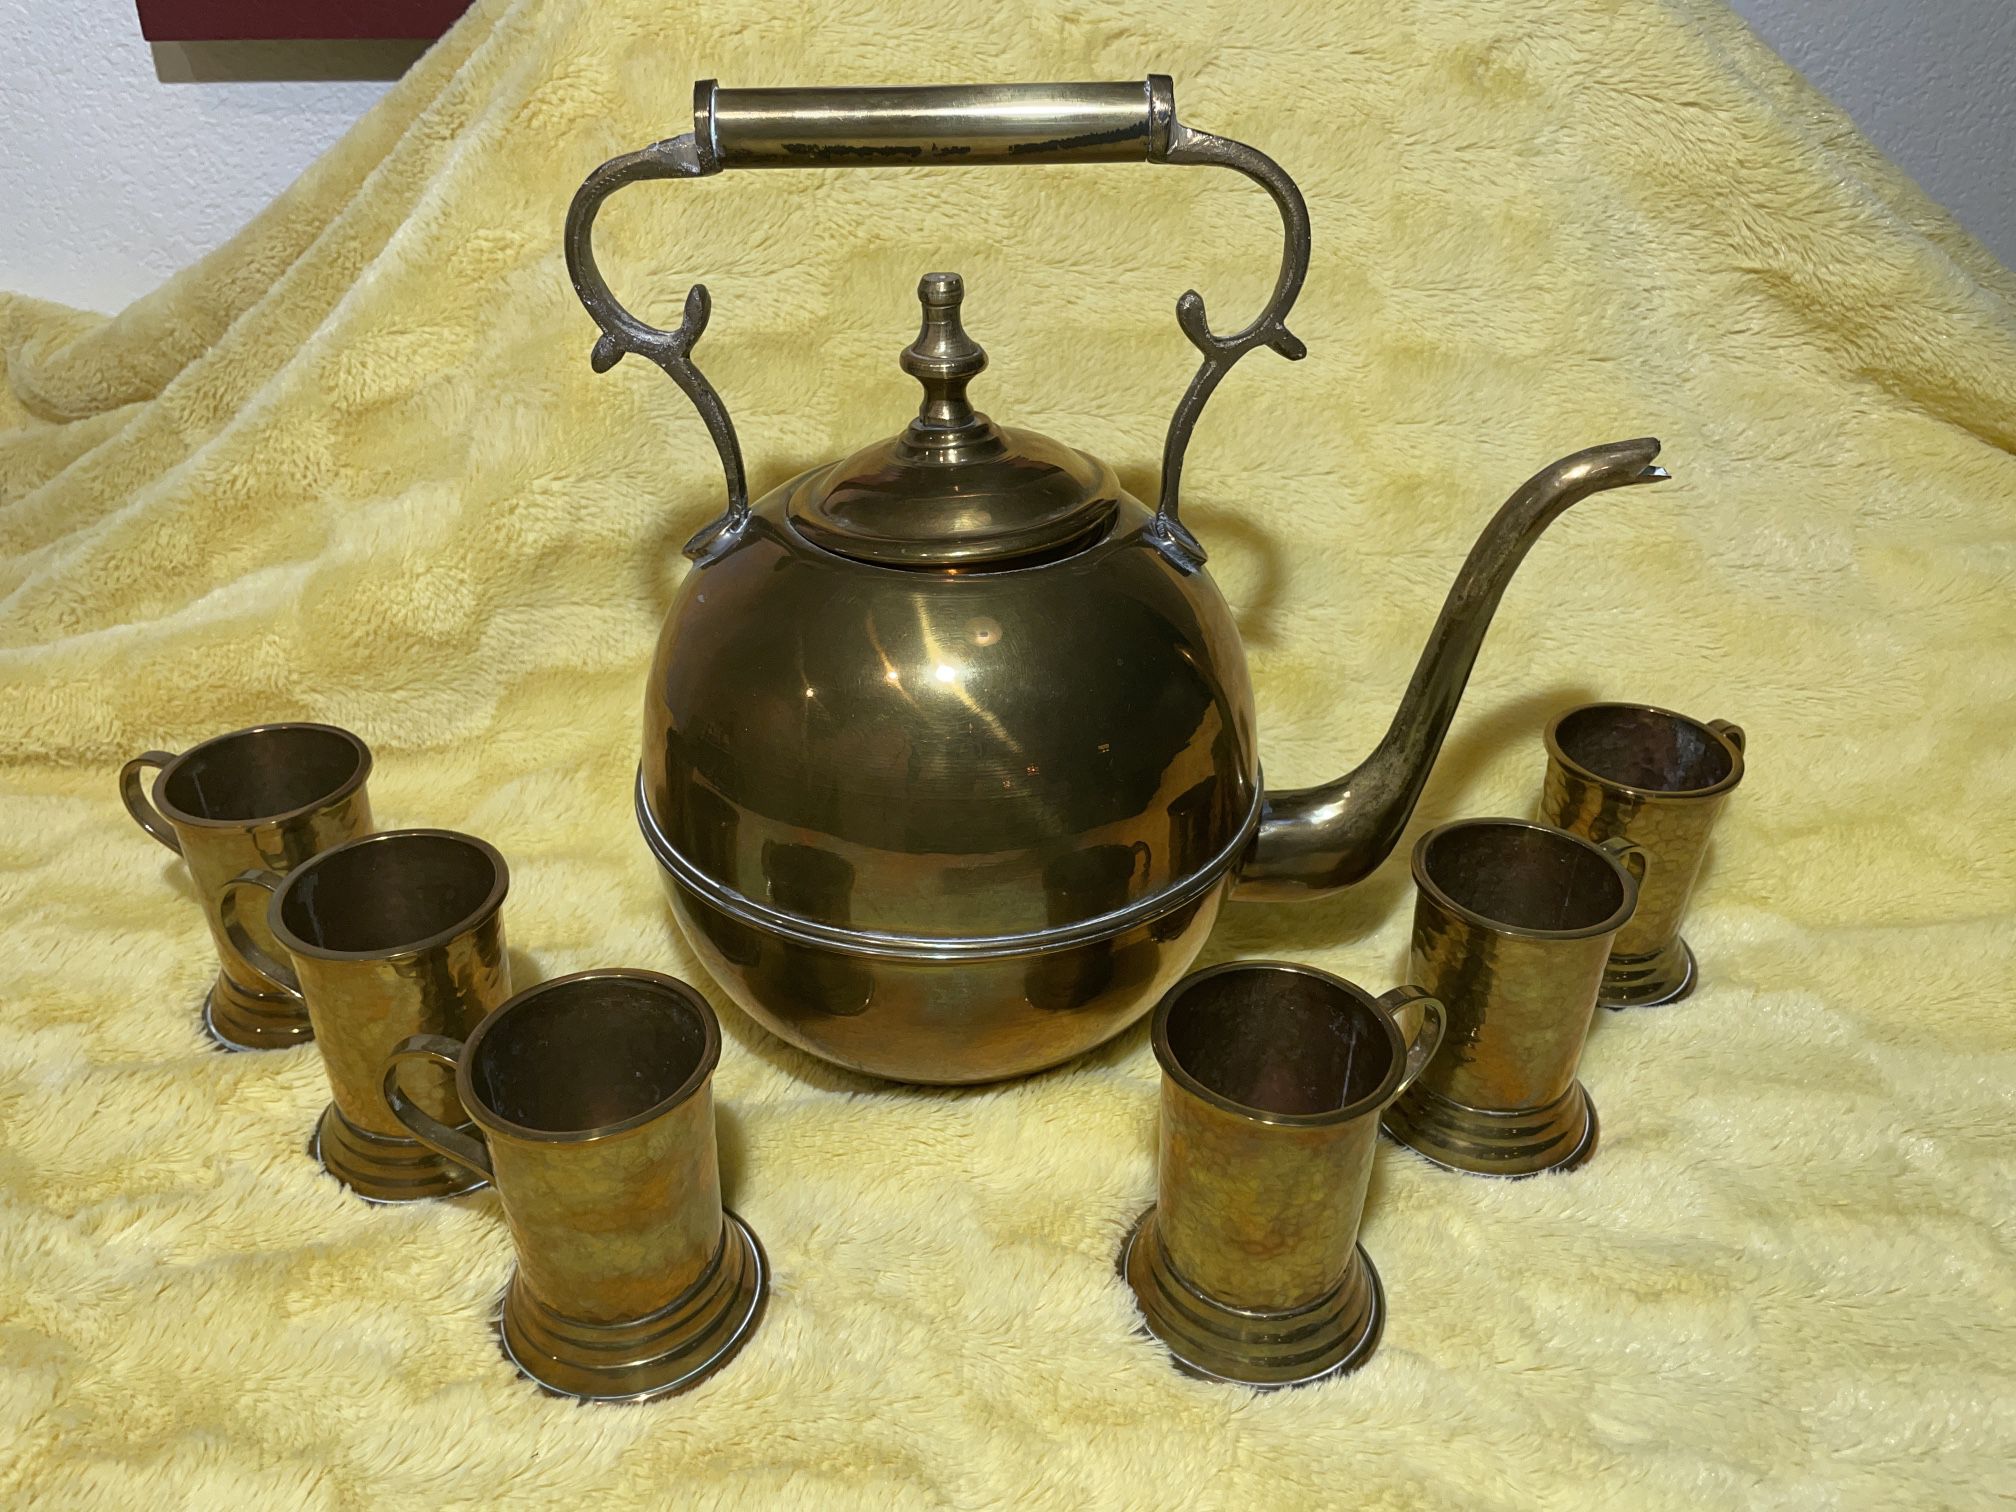 MOROCCAN VINTAGE ANTIQUE BRASS TEAPOT/KETTLE and VINTAGE HAMMERED SMALL COPPER MUGS (set of 6)